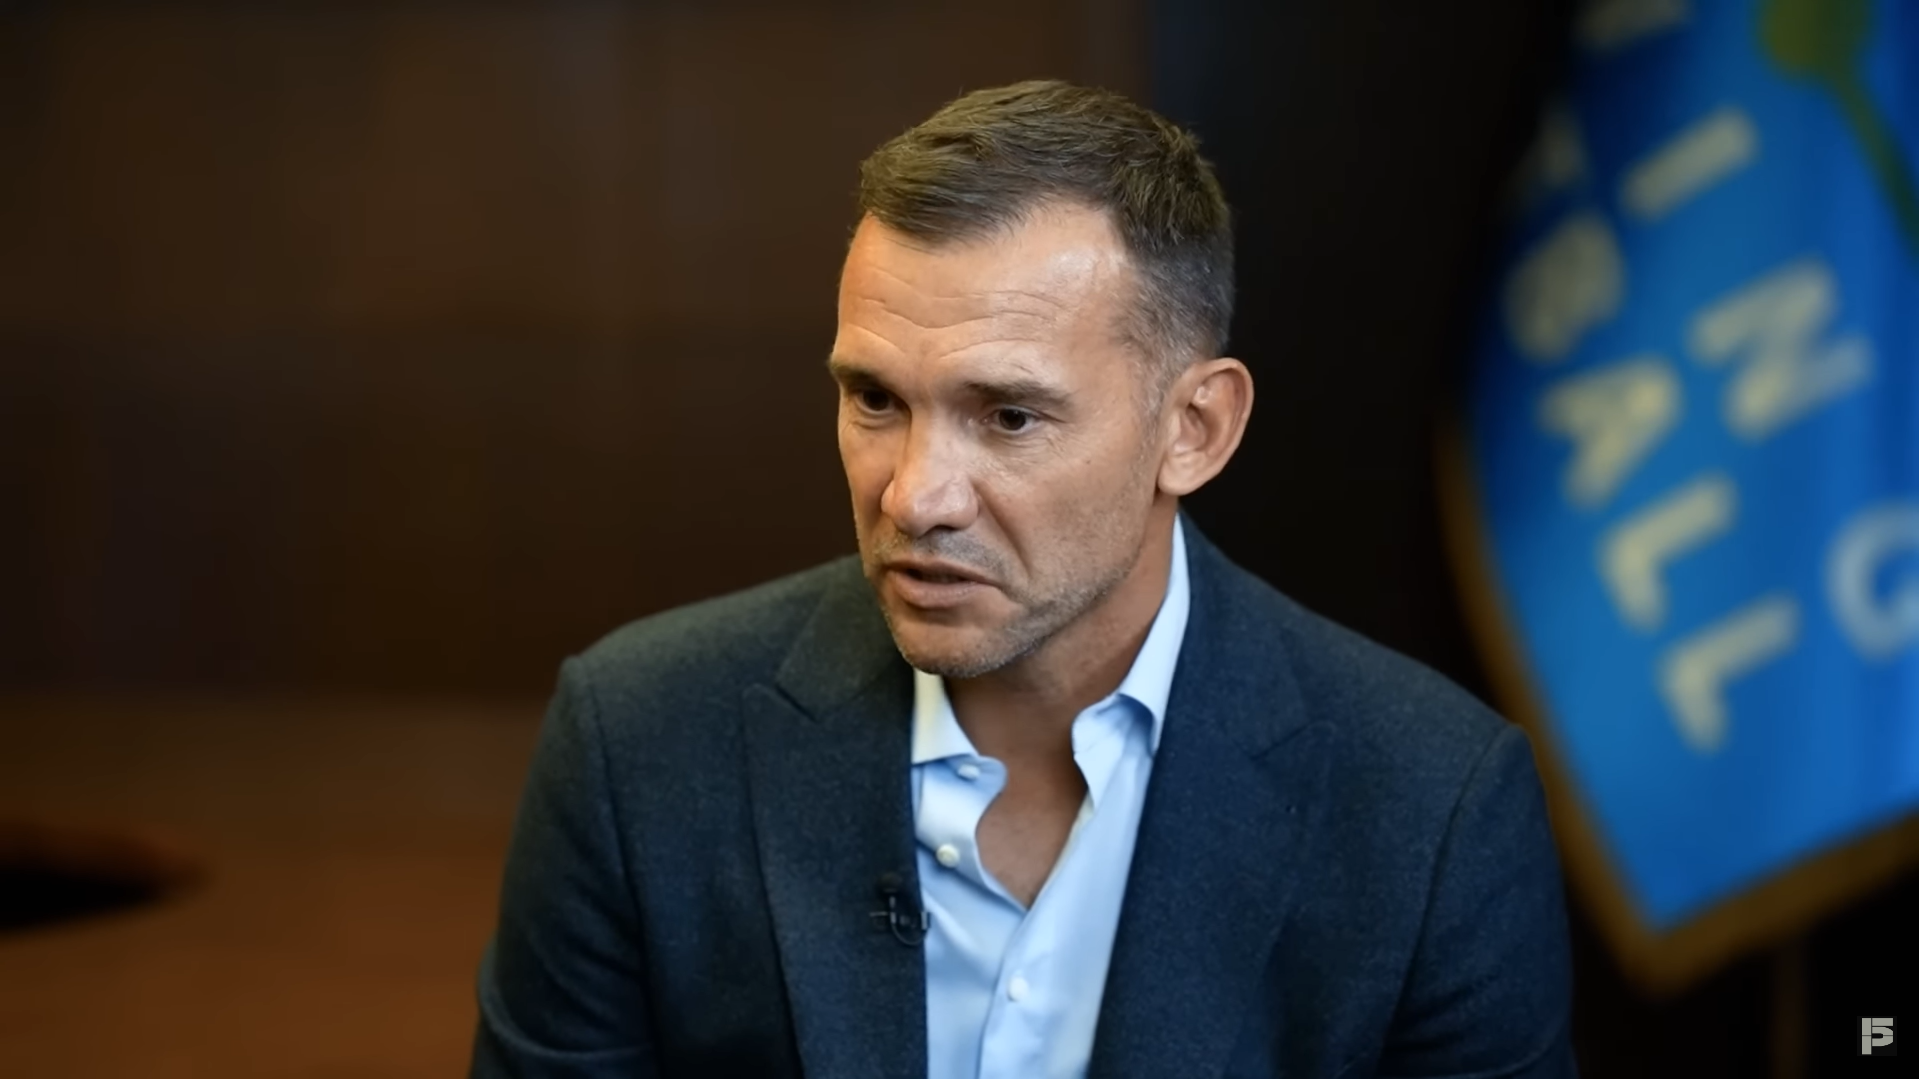 ''It has flown'': Andriy Shevchenko's house in Kyiv has come under fire several times